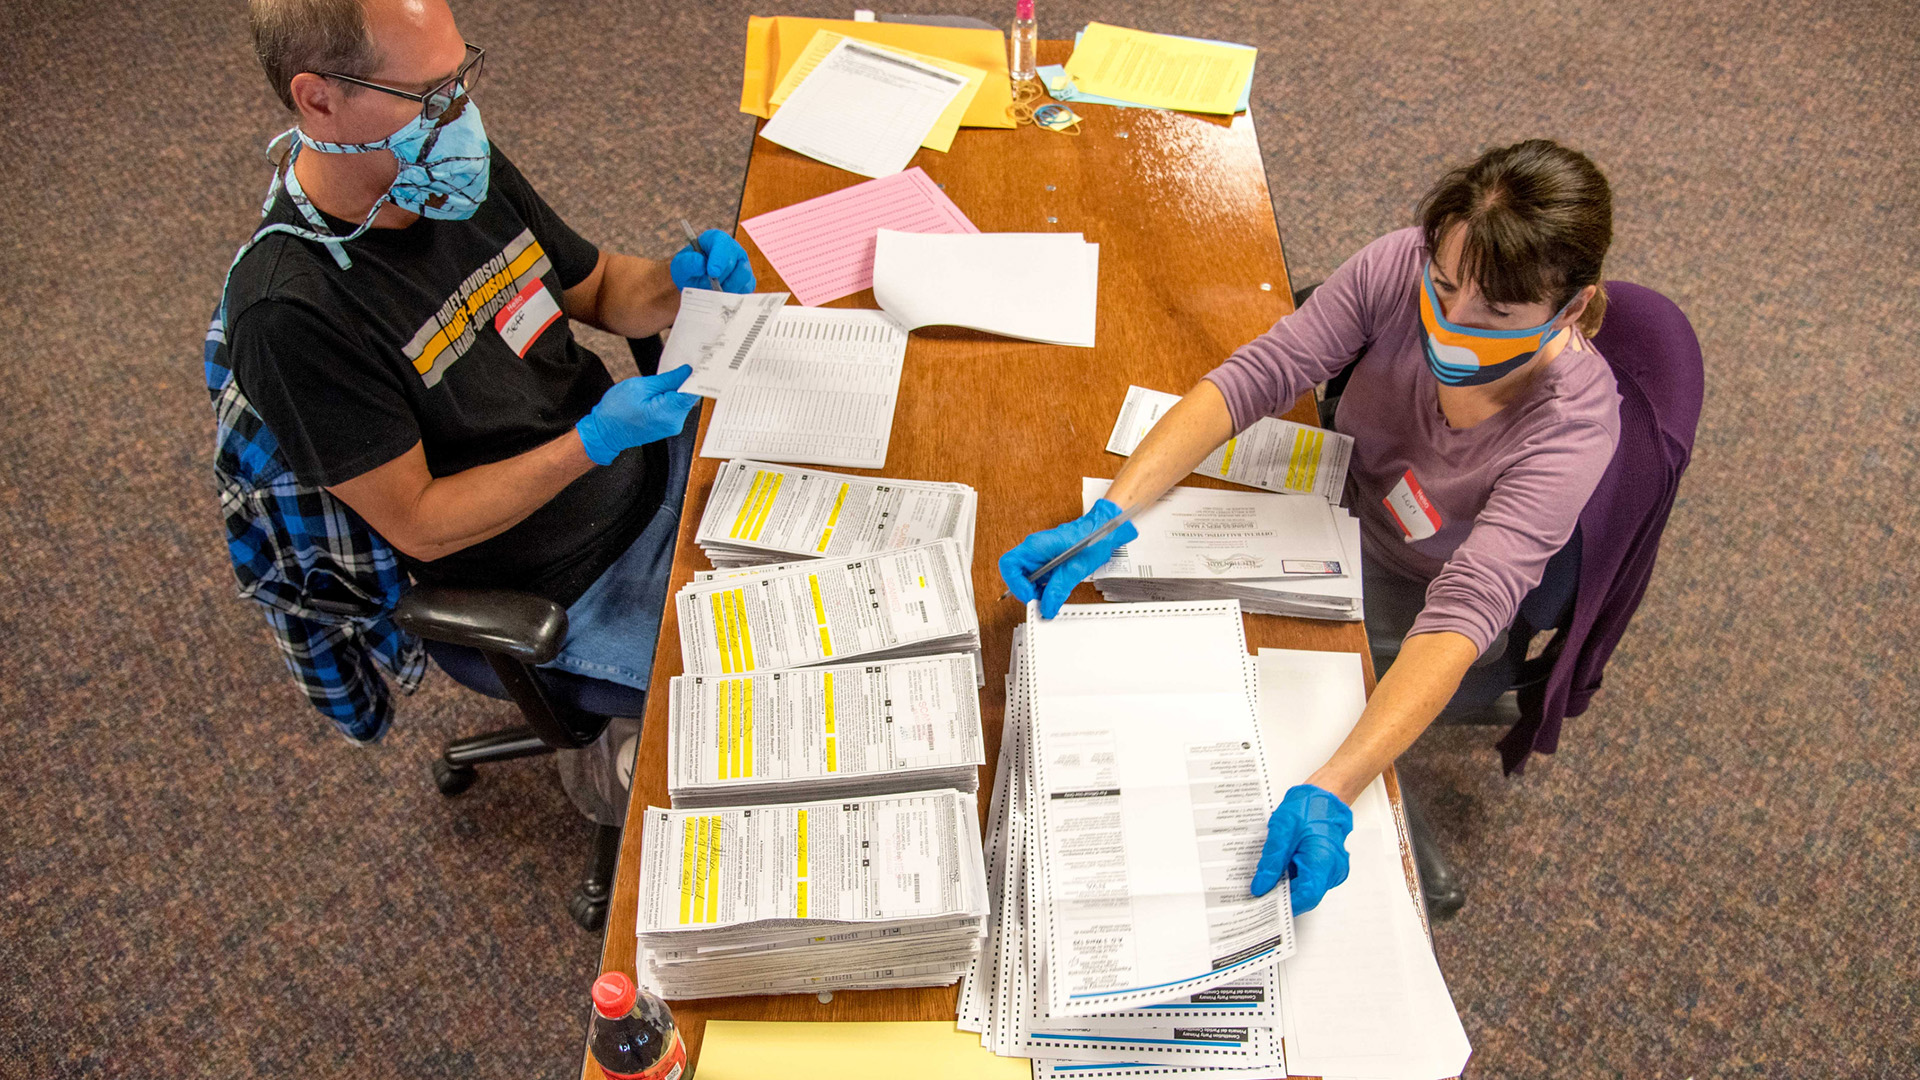 On overhead photo shows two people seated at opposite sides of a wood table covered with stacks of ballots and other election materials.